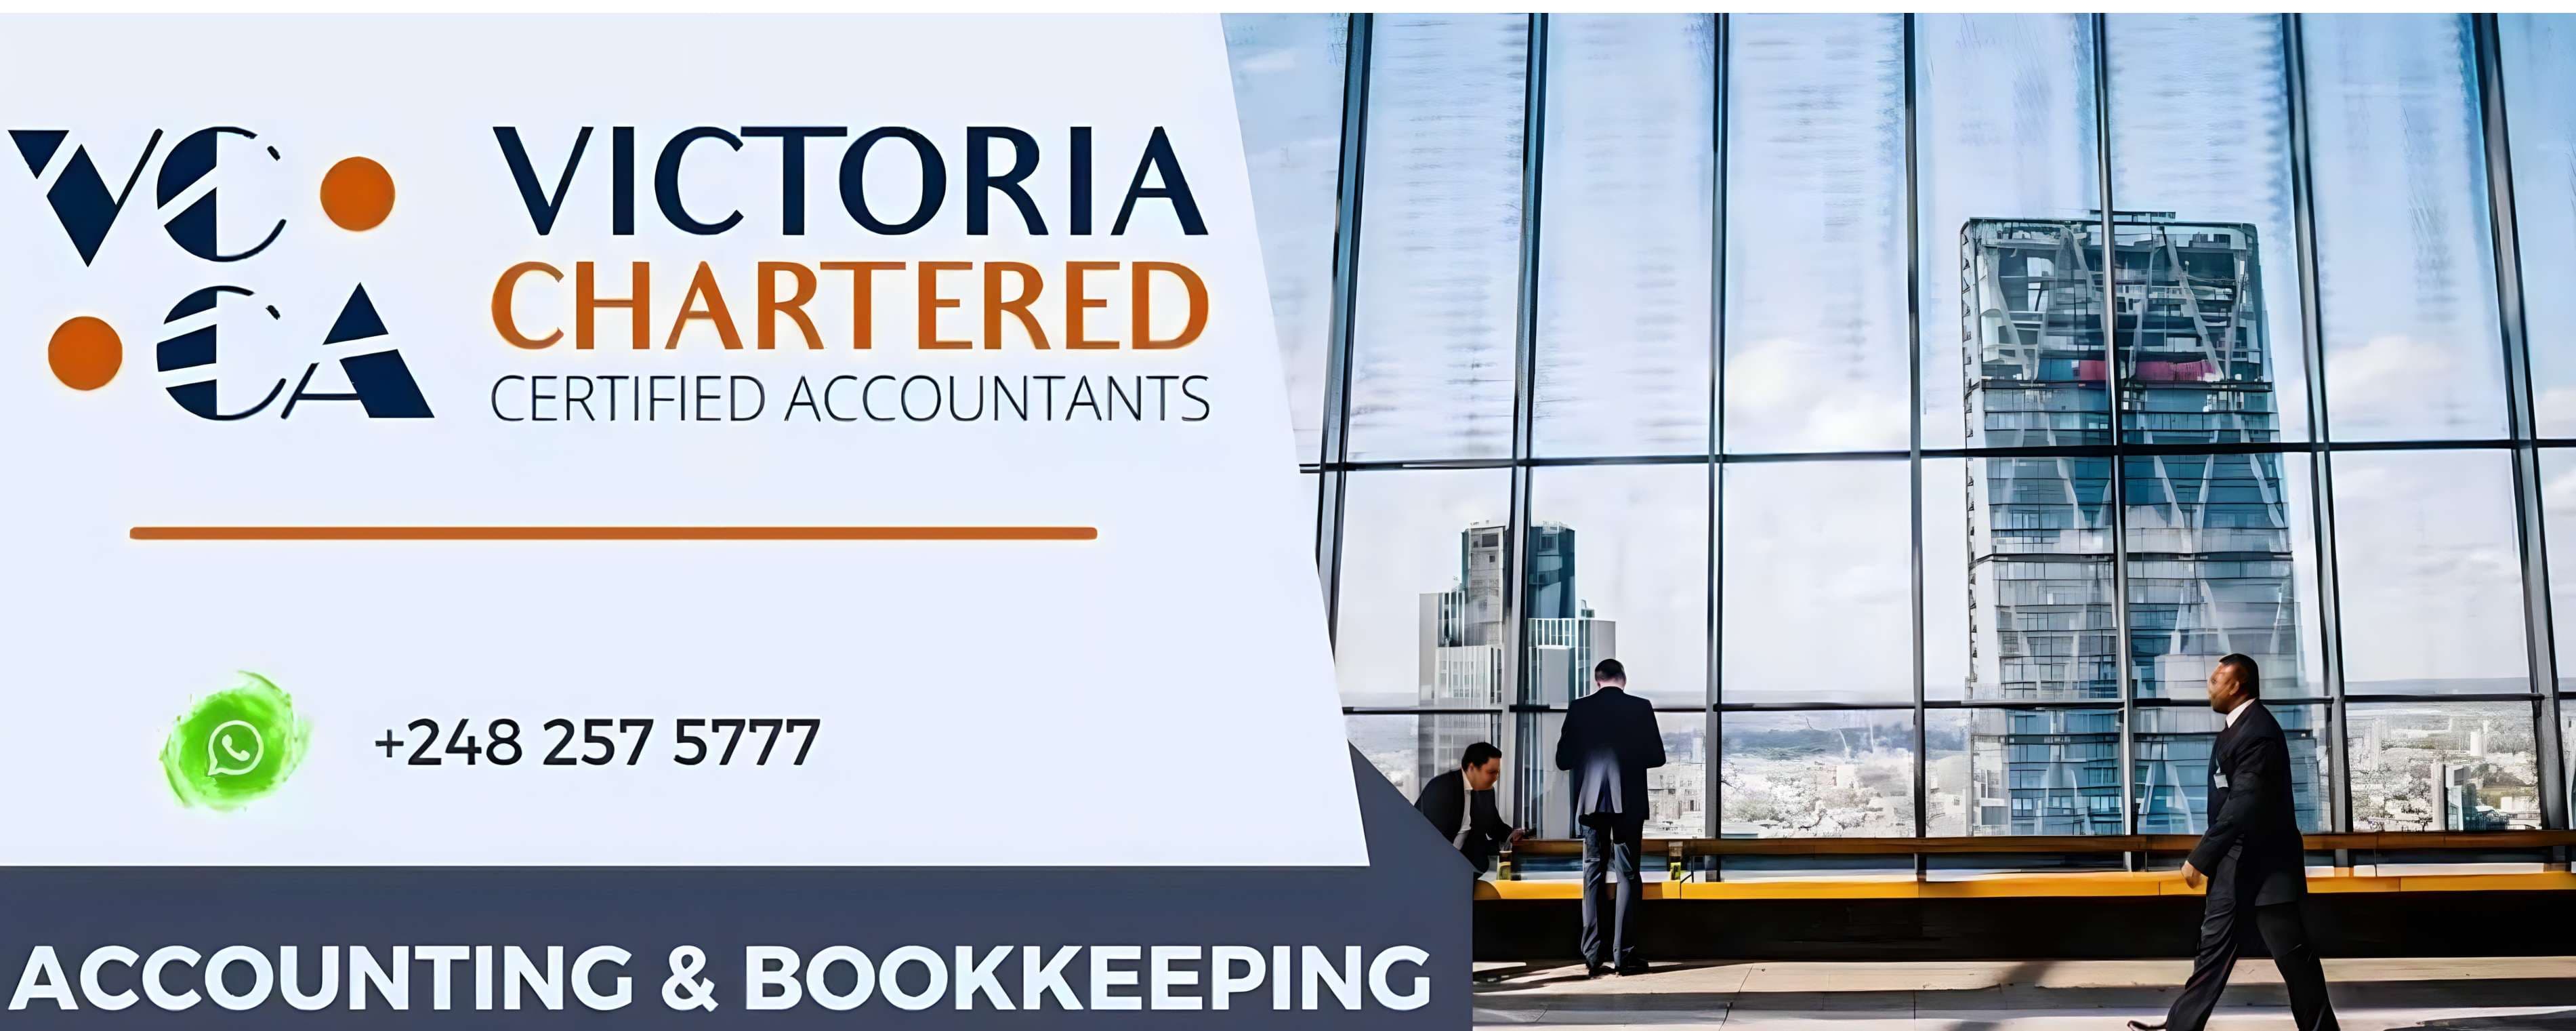 Victoria Chartered Certified Accountants